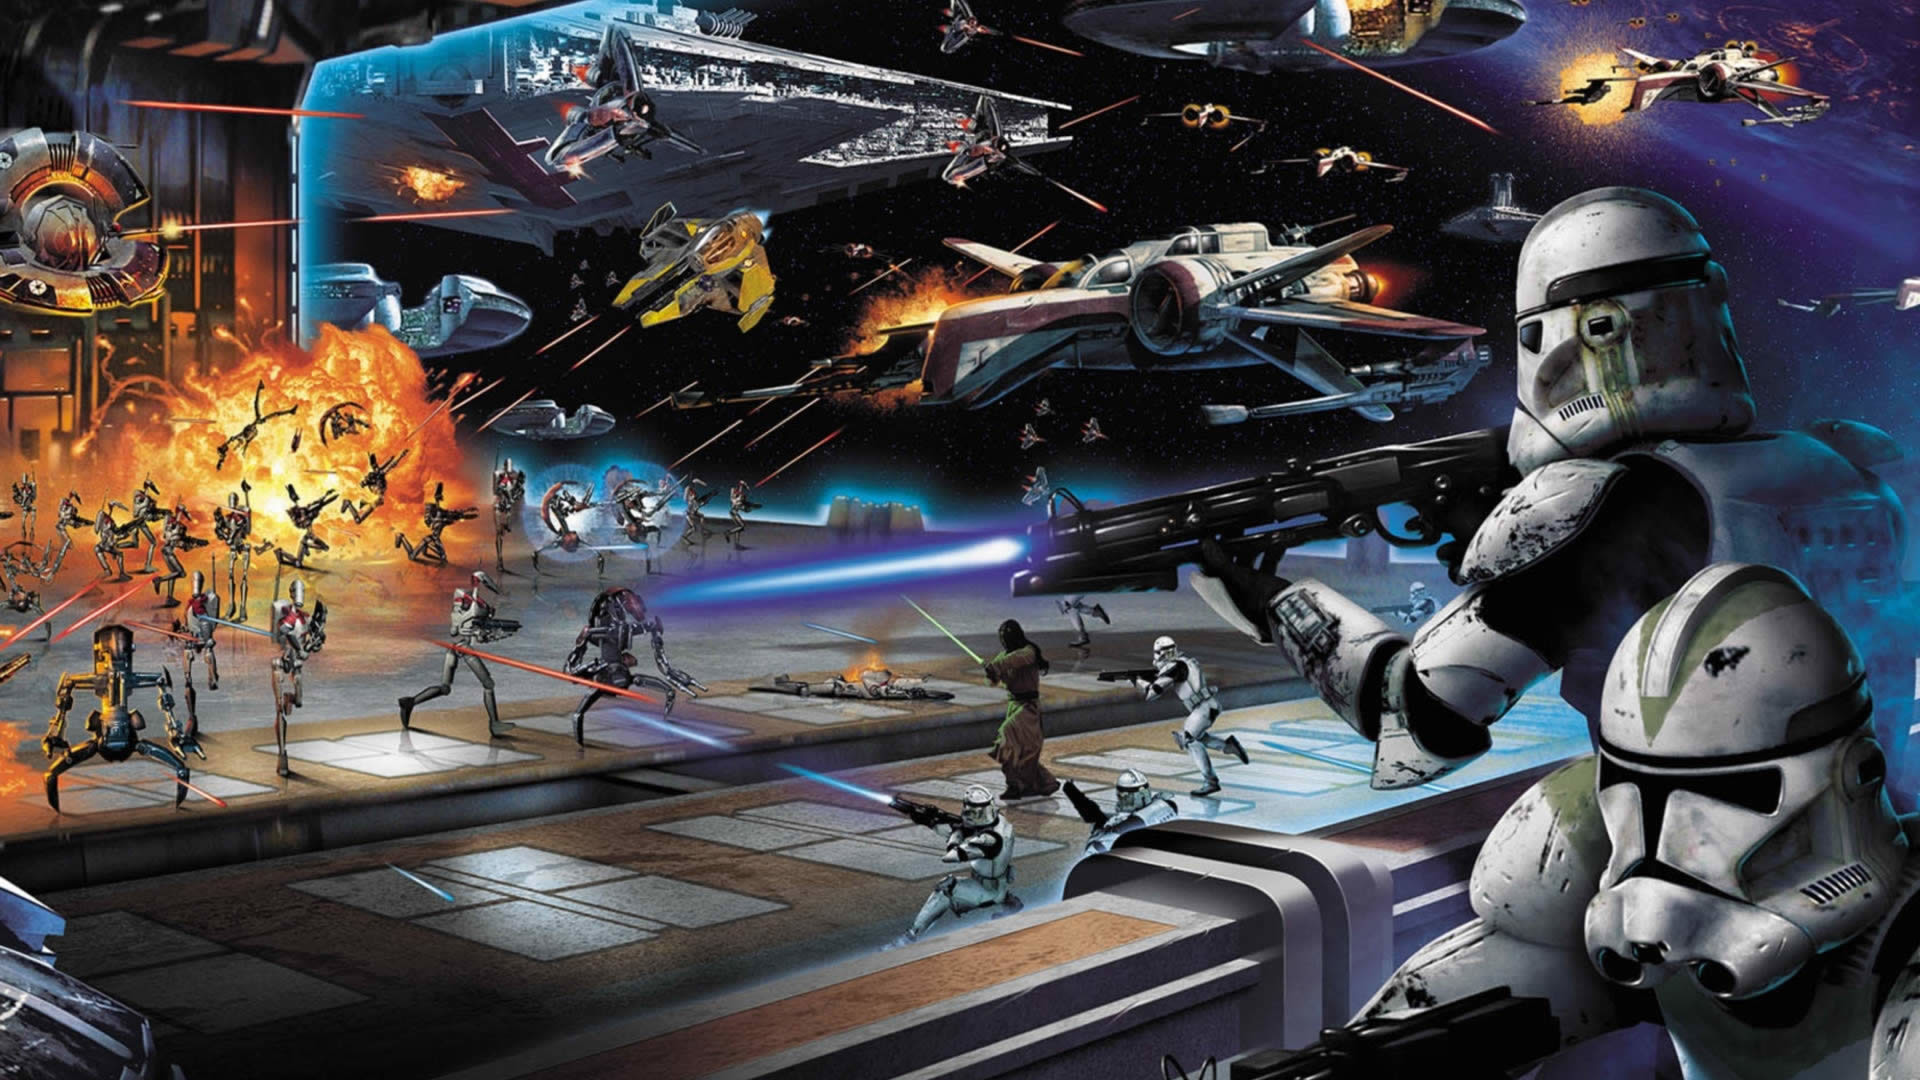 star wars room wallpaper,action adventure game,shooter game,pc game,strategy video game,games